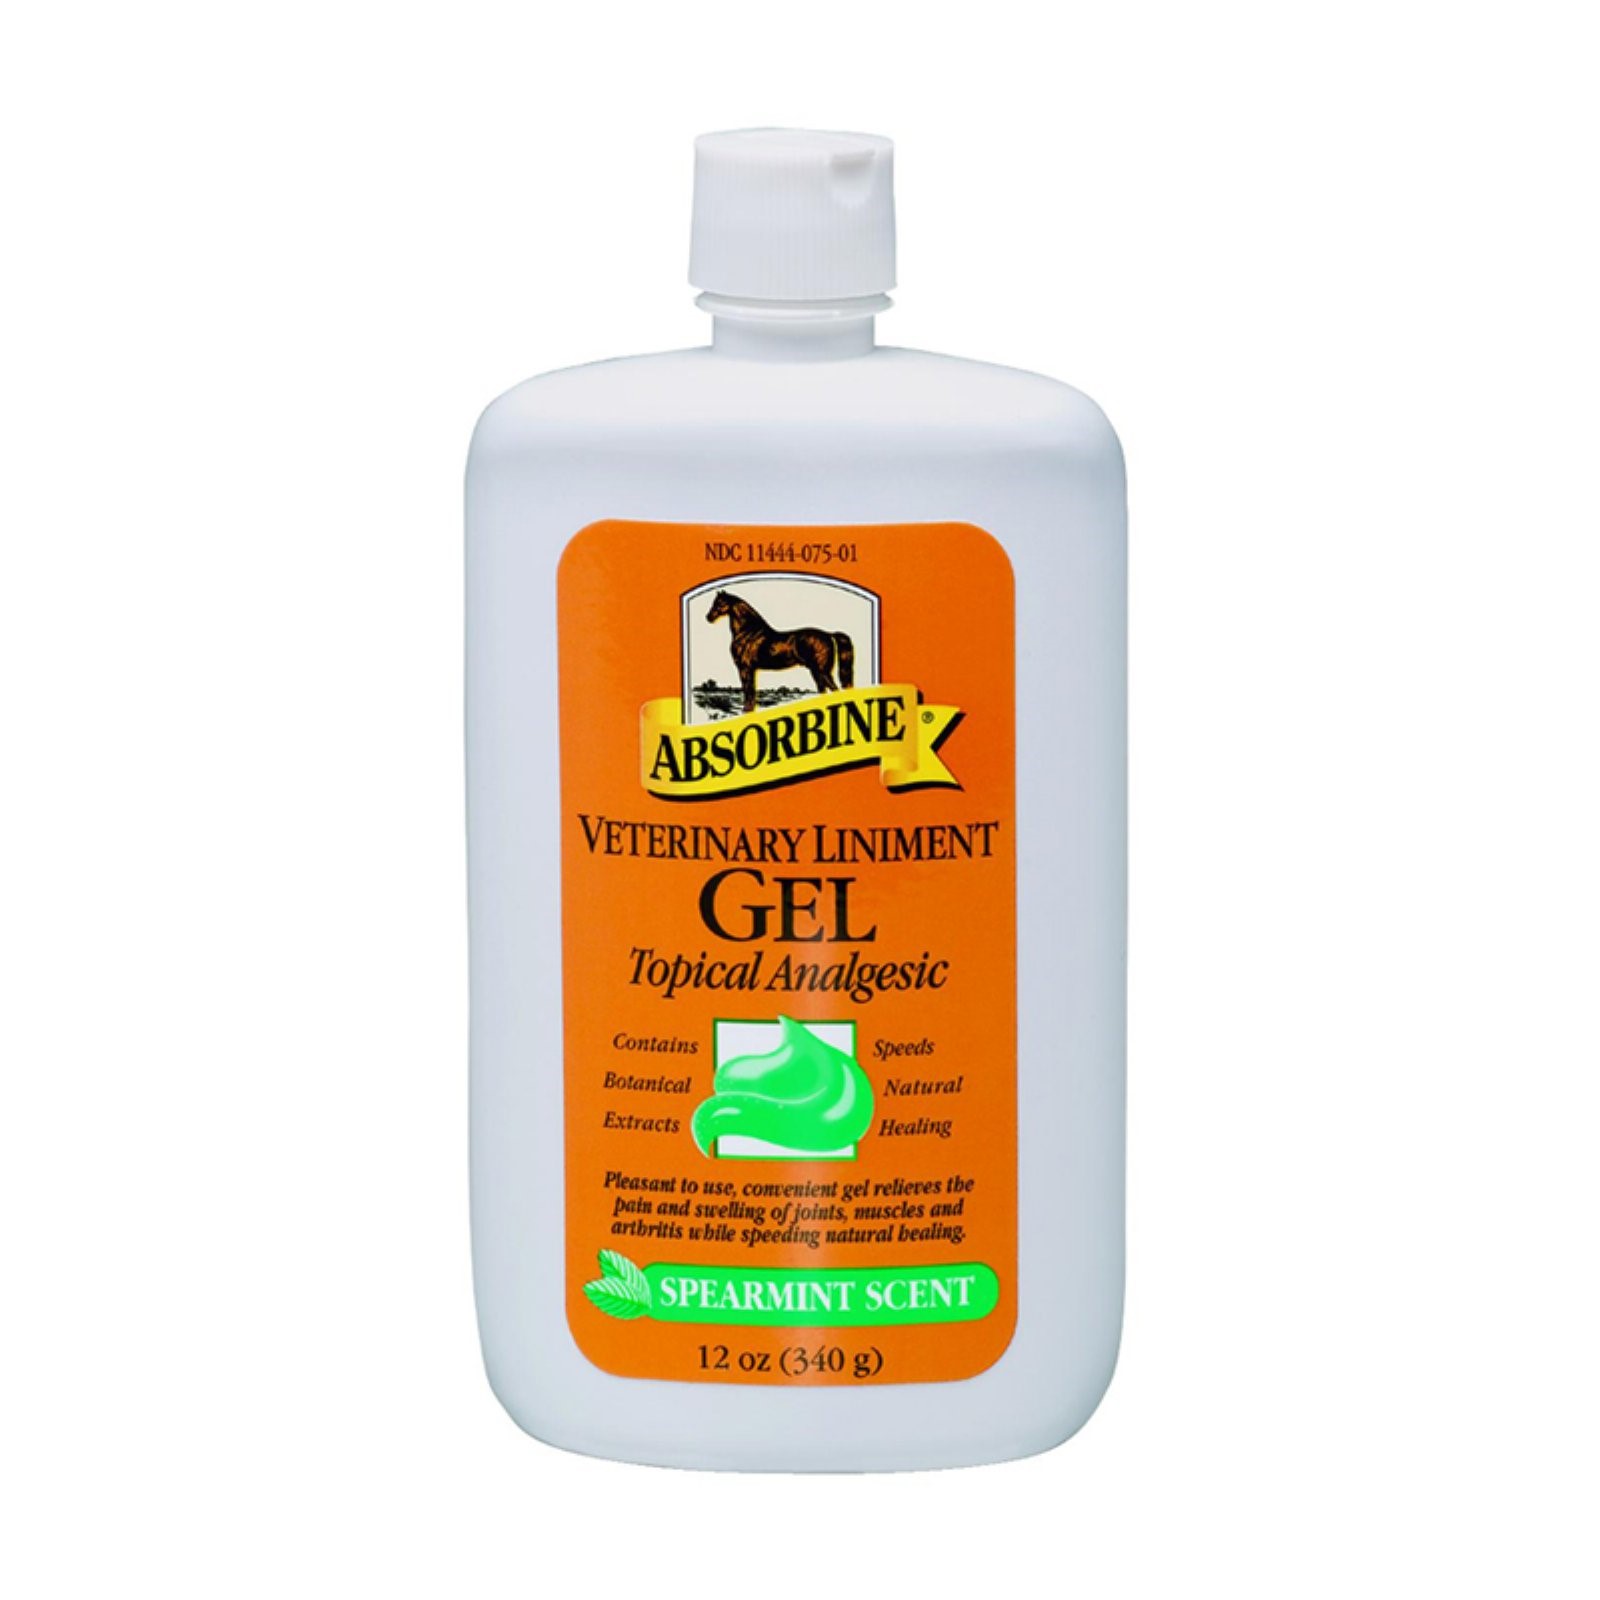 Absorbine Veterinary Liniment Spearmint Herbal Gel Topical Analgesic, 12 oz - image 1 of 4